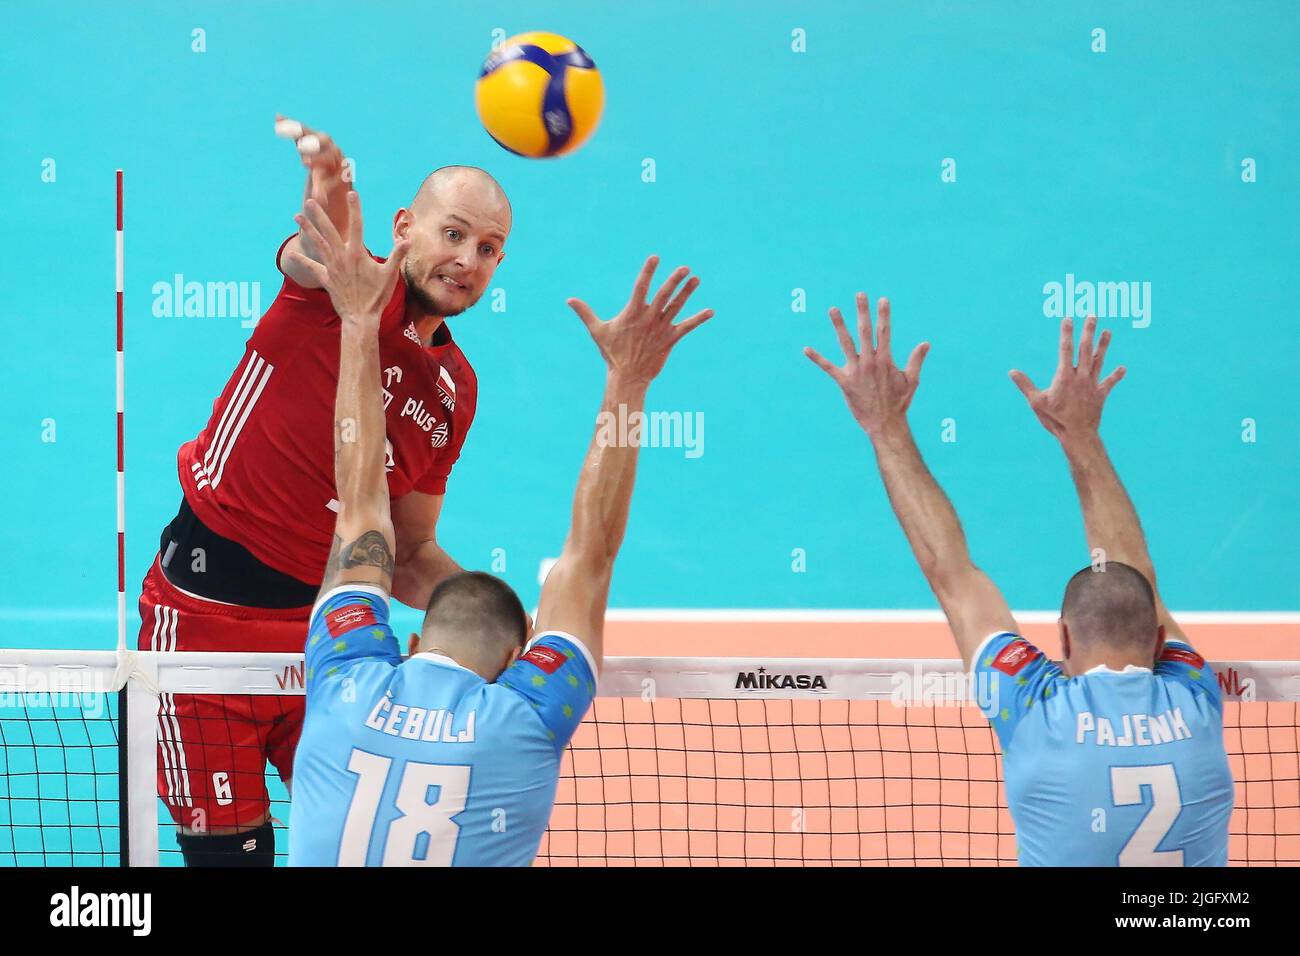 Gdansk, Poland. 10th July, 2022. Bartosz Kurek (L) of Poland and Tine Urnaut (C) and Alen Pajenk (R) of Slovenia during the 2022 men's FIVB Volleyball Nations League match between Poland and Slovenia in Gdansk, Poland, 10 July 2022. Credit: PAP/Alamy Live News Stock Photo